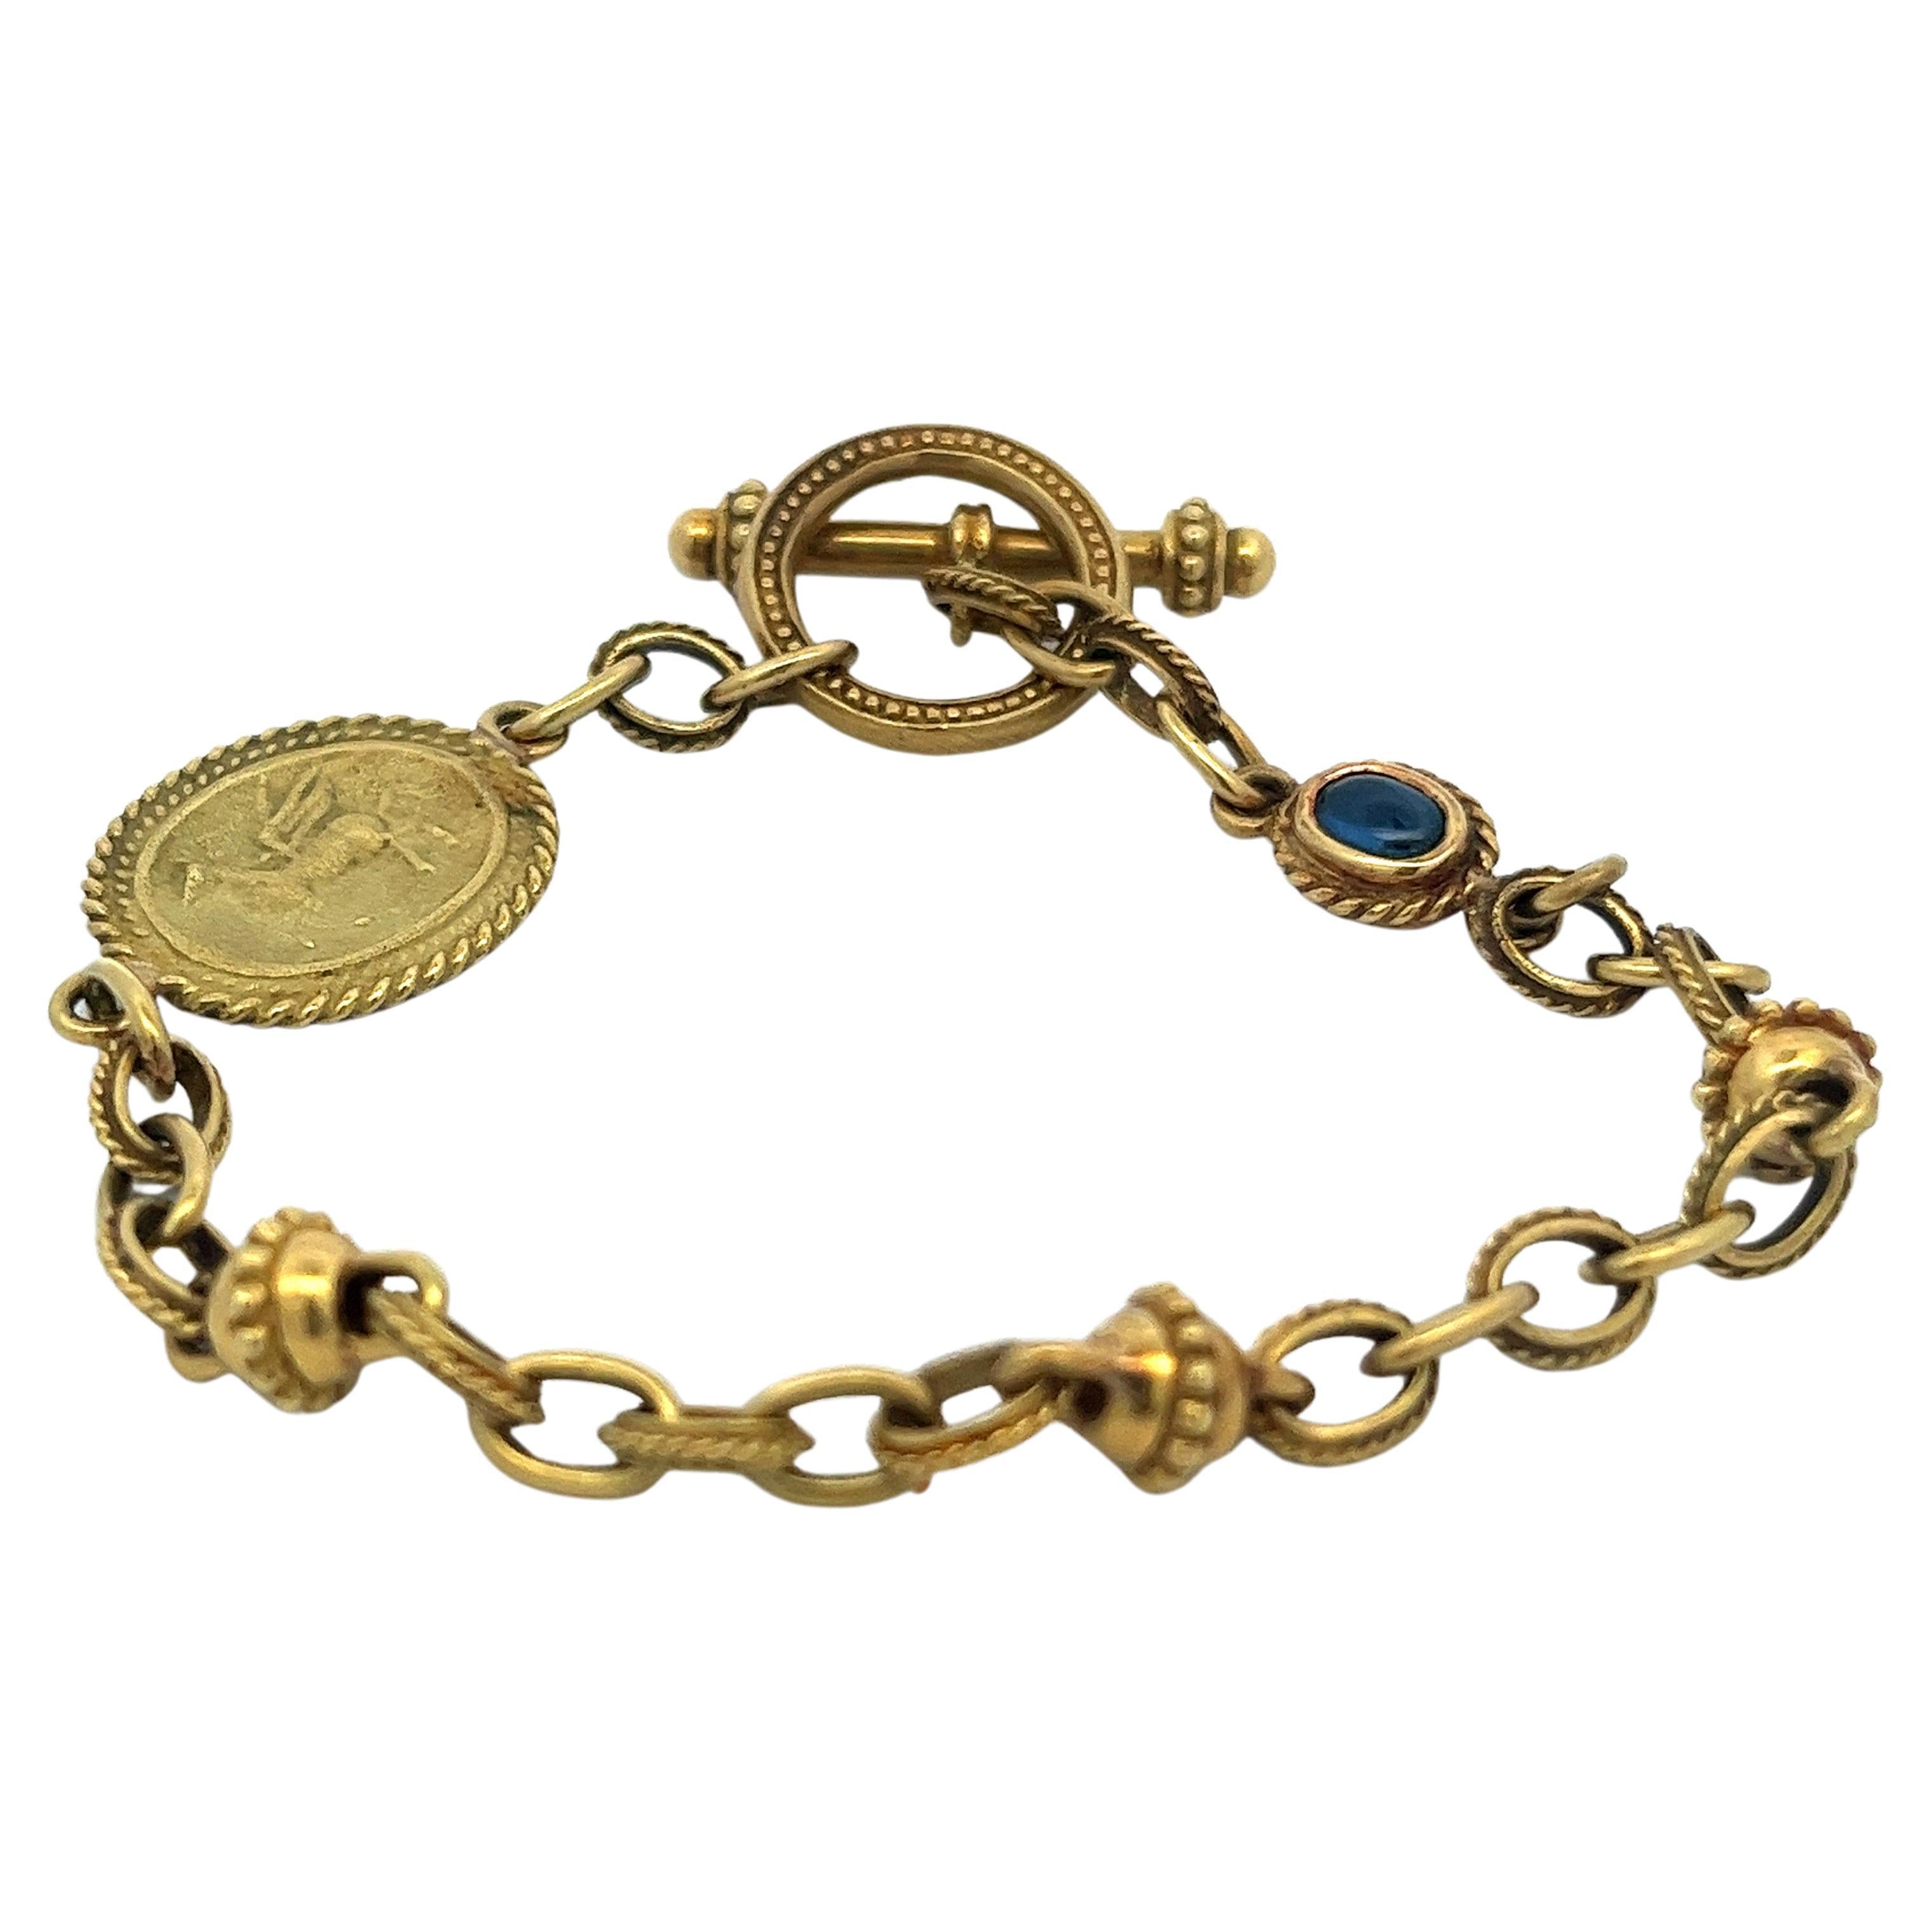 
This exquisite bracelet is a representation of Victorian elegance, meticulously crafted from 18 Karat yellow gold. It features a series of artisan links, culminating in a stunning Pegasus motif that adds an air of mythological charm. The central